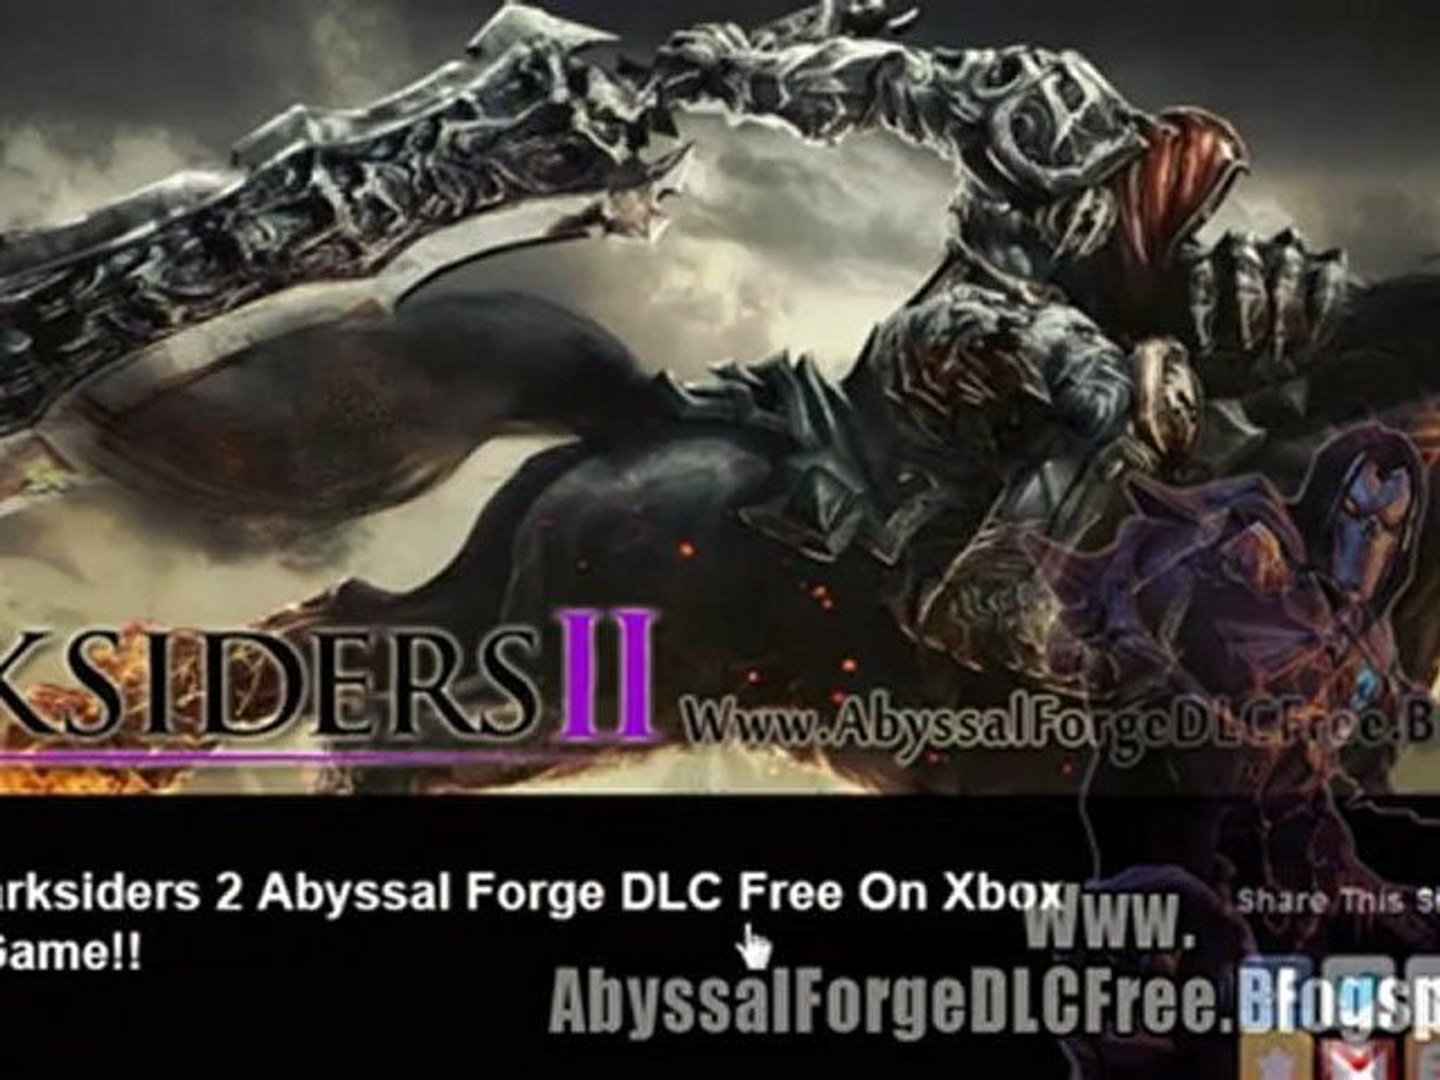 Darksiders 2 Abyssal Forge DLC Codes - Free!! - video Dailymotion